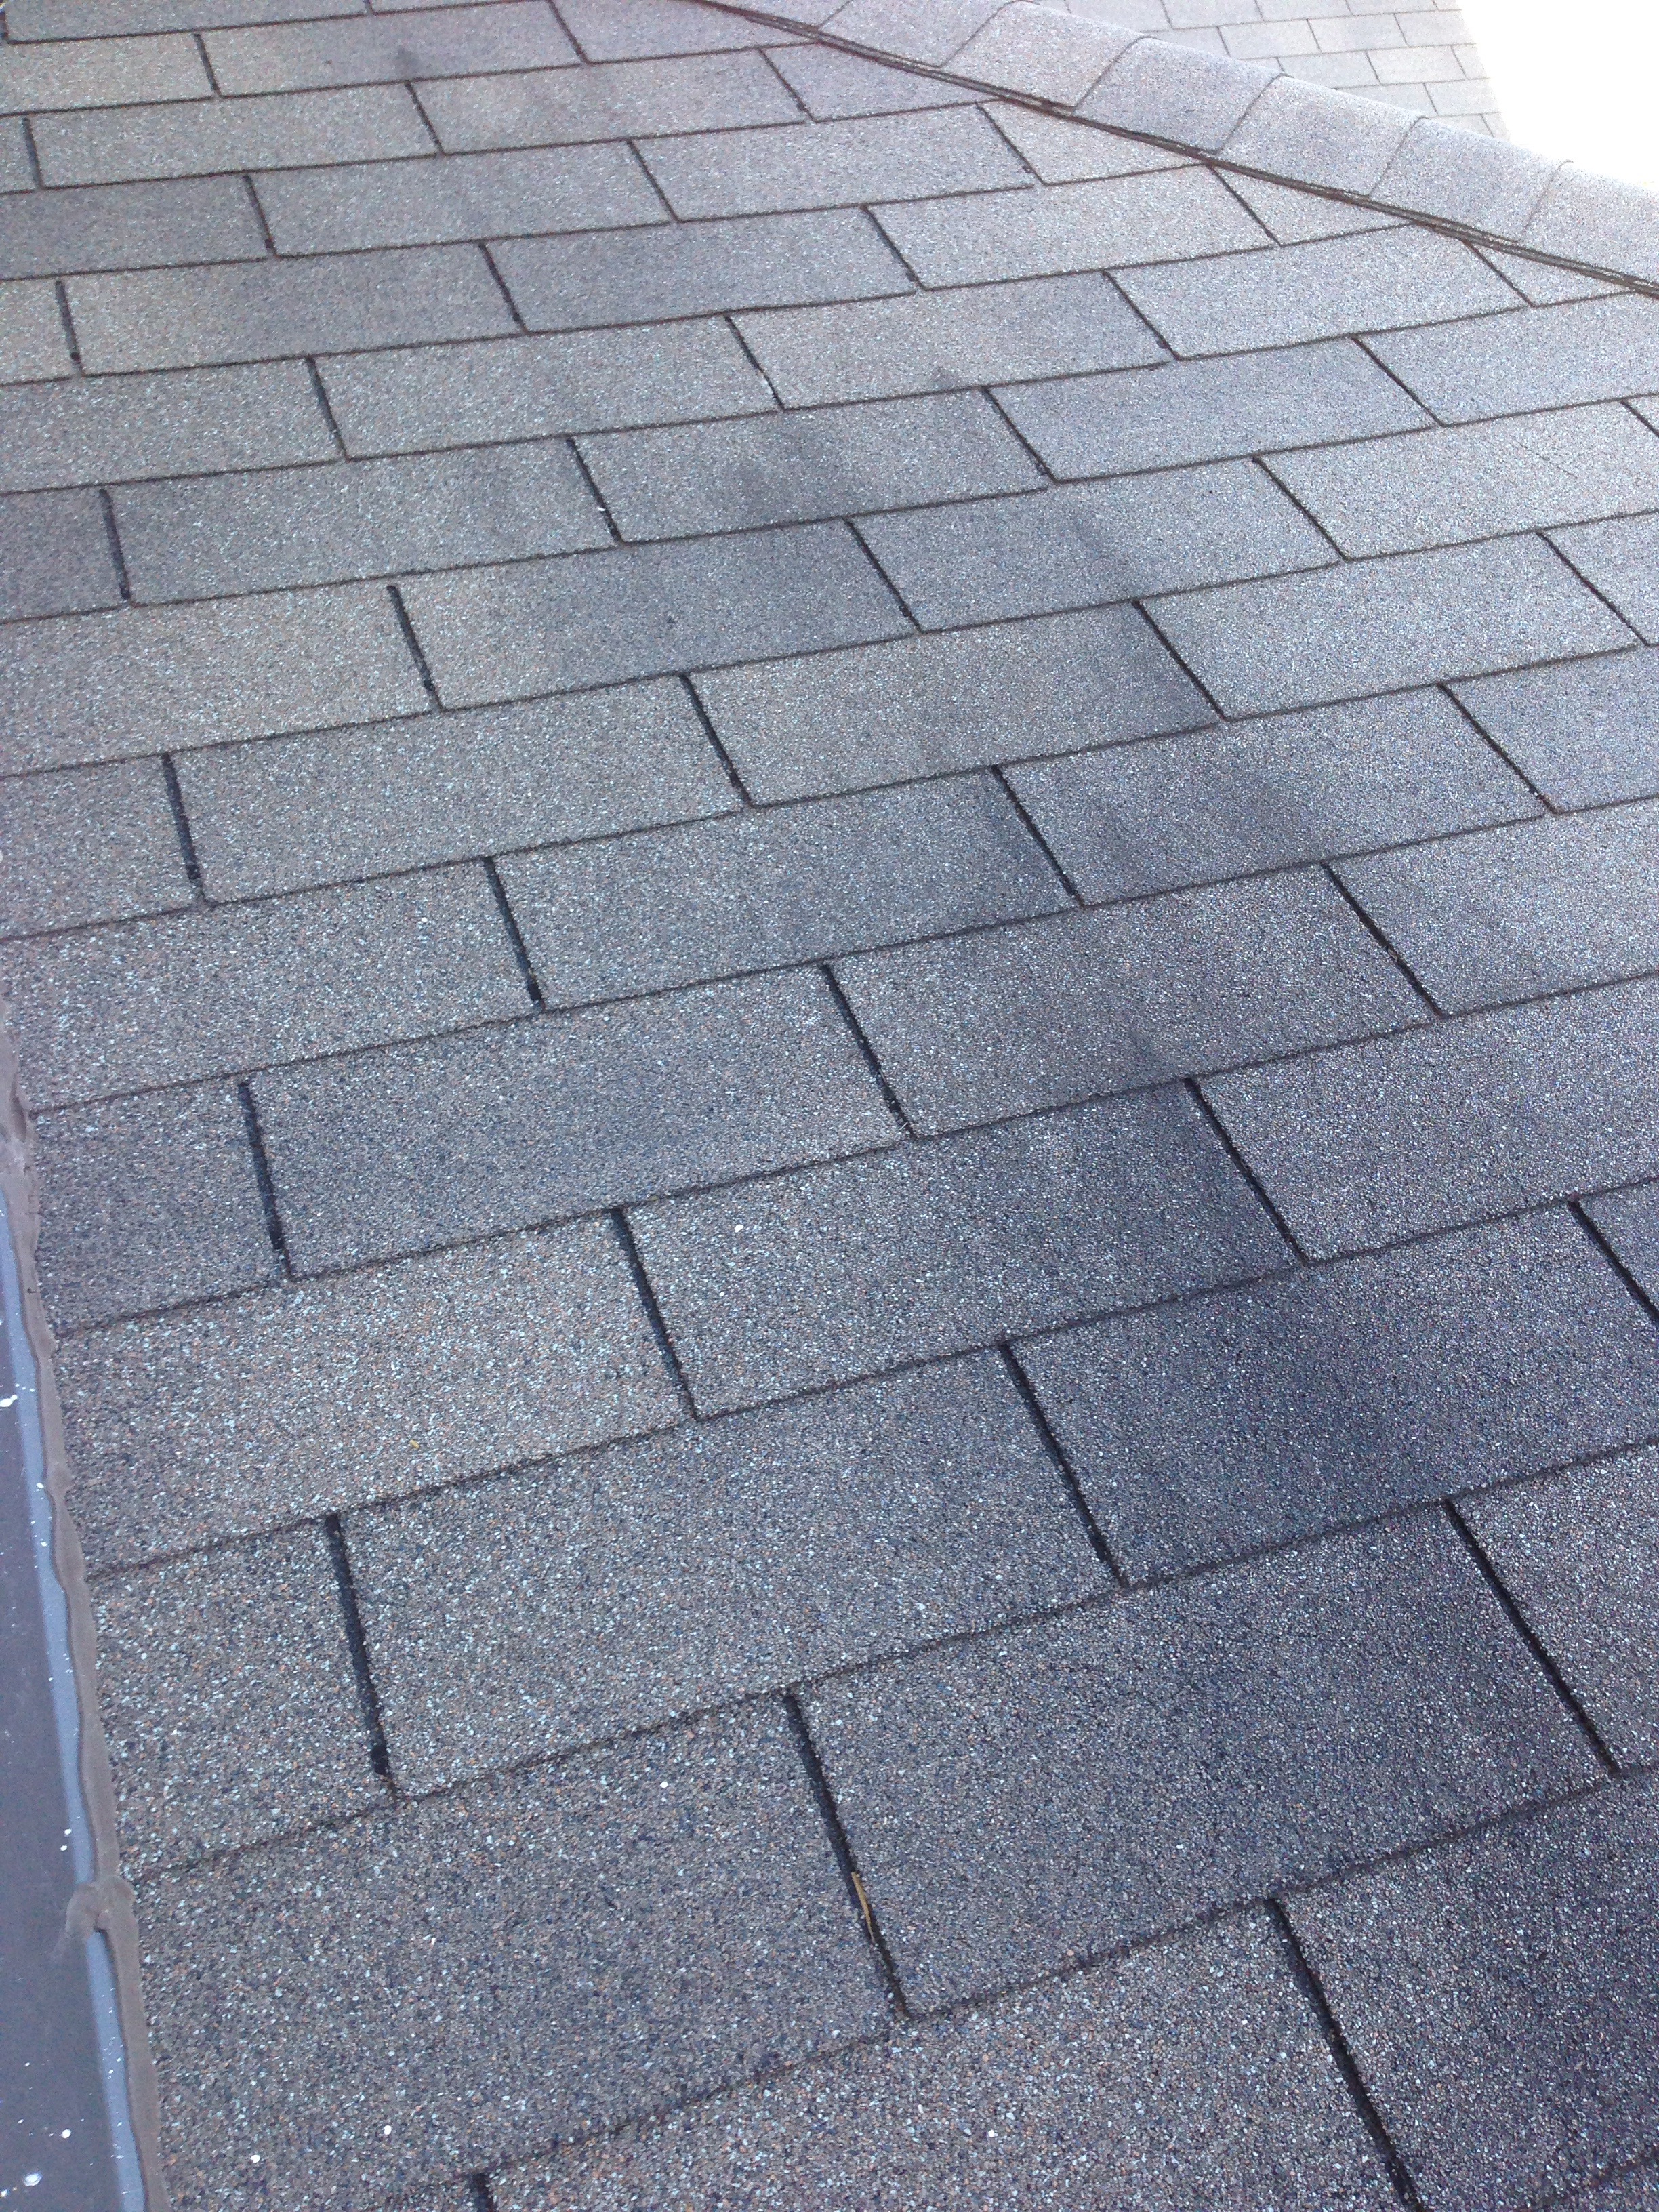 warranty claims for roof shingles